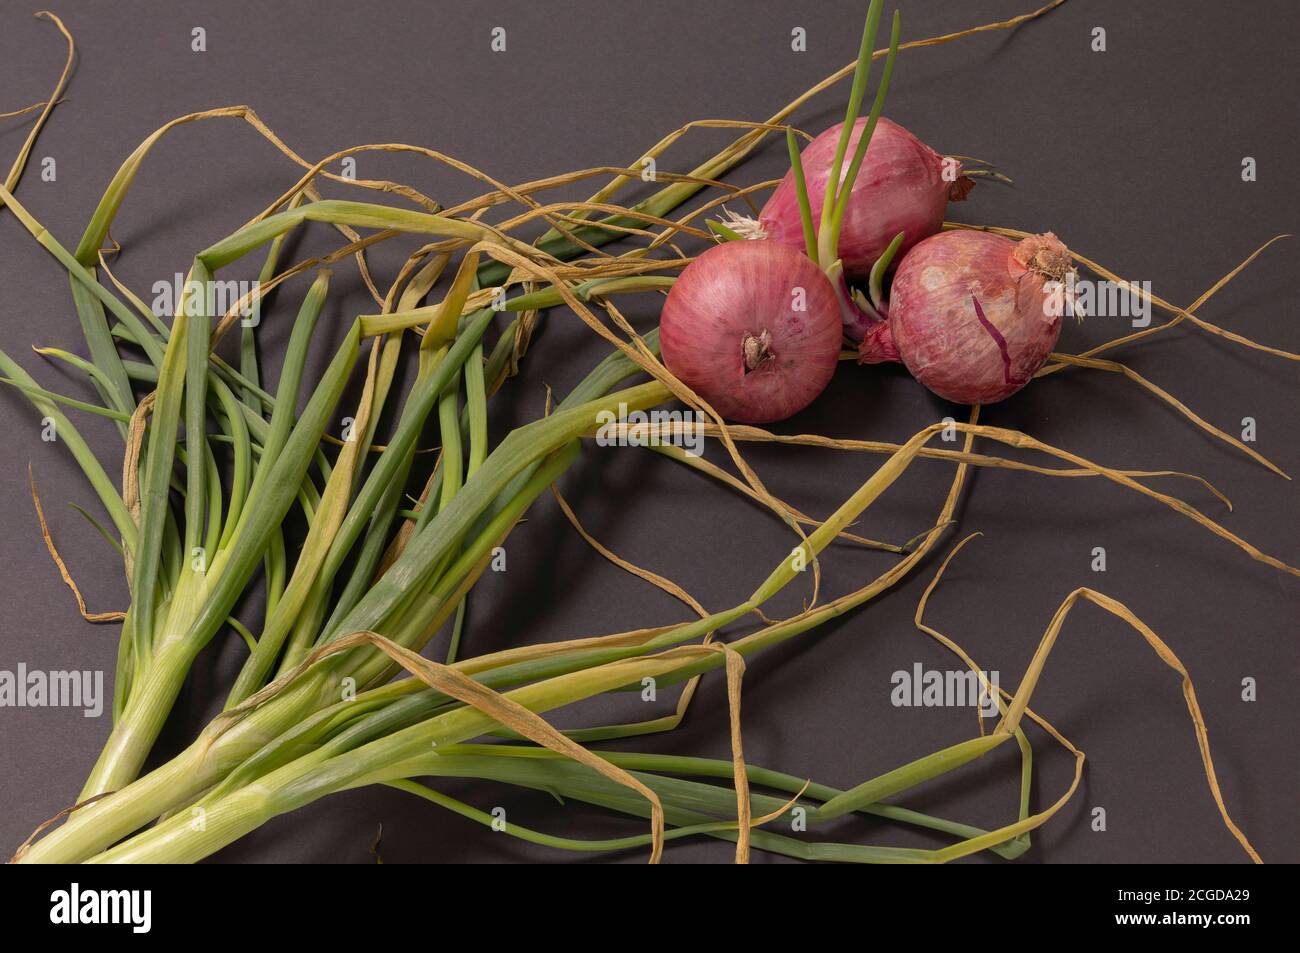 Onions and scallions still life. Scallions, spring onion or green onion. Red onion. Low key photography. Stock Photo